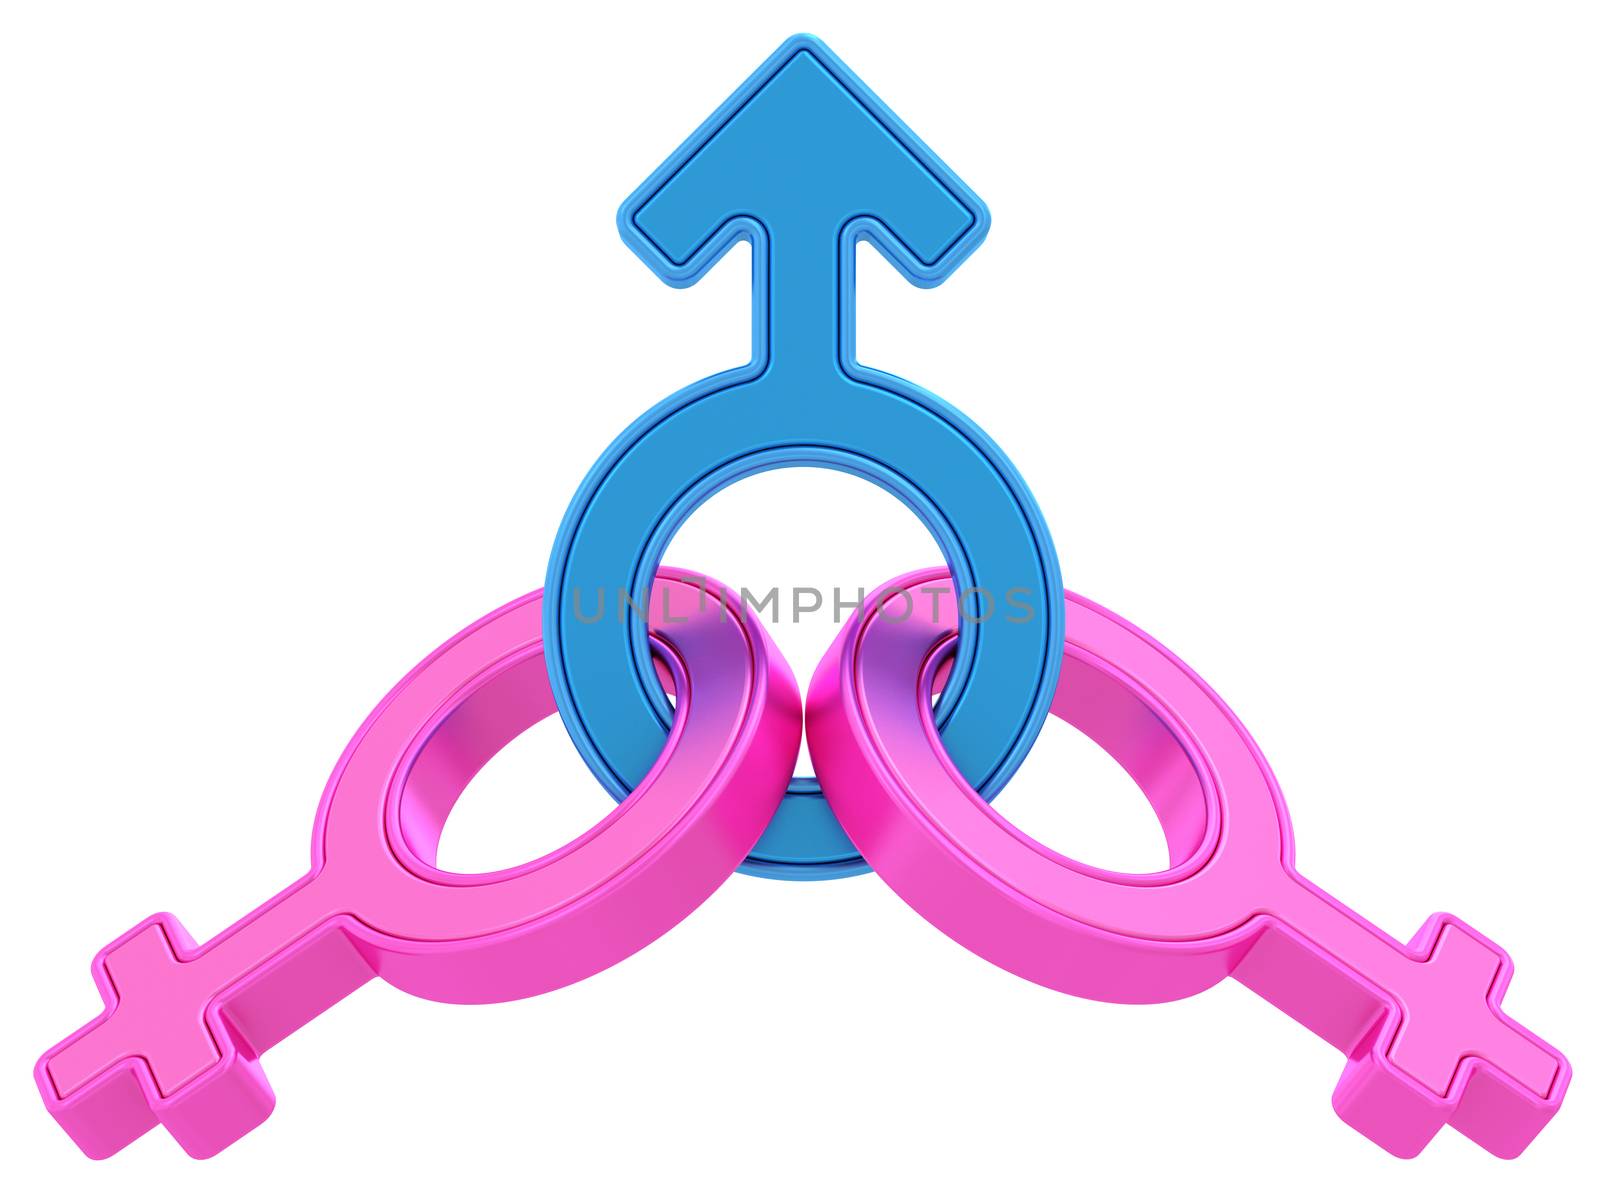 Male and two female gender symbols chained together on white background. High resolution 3D image